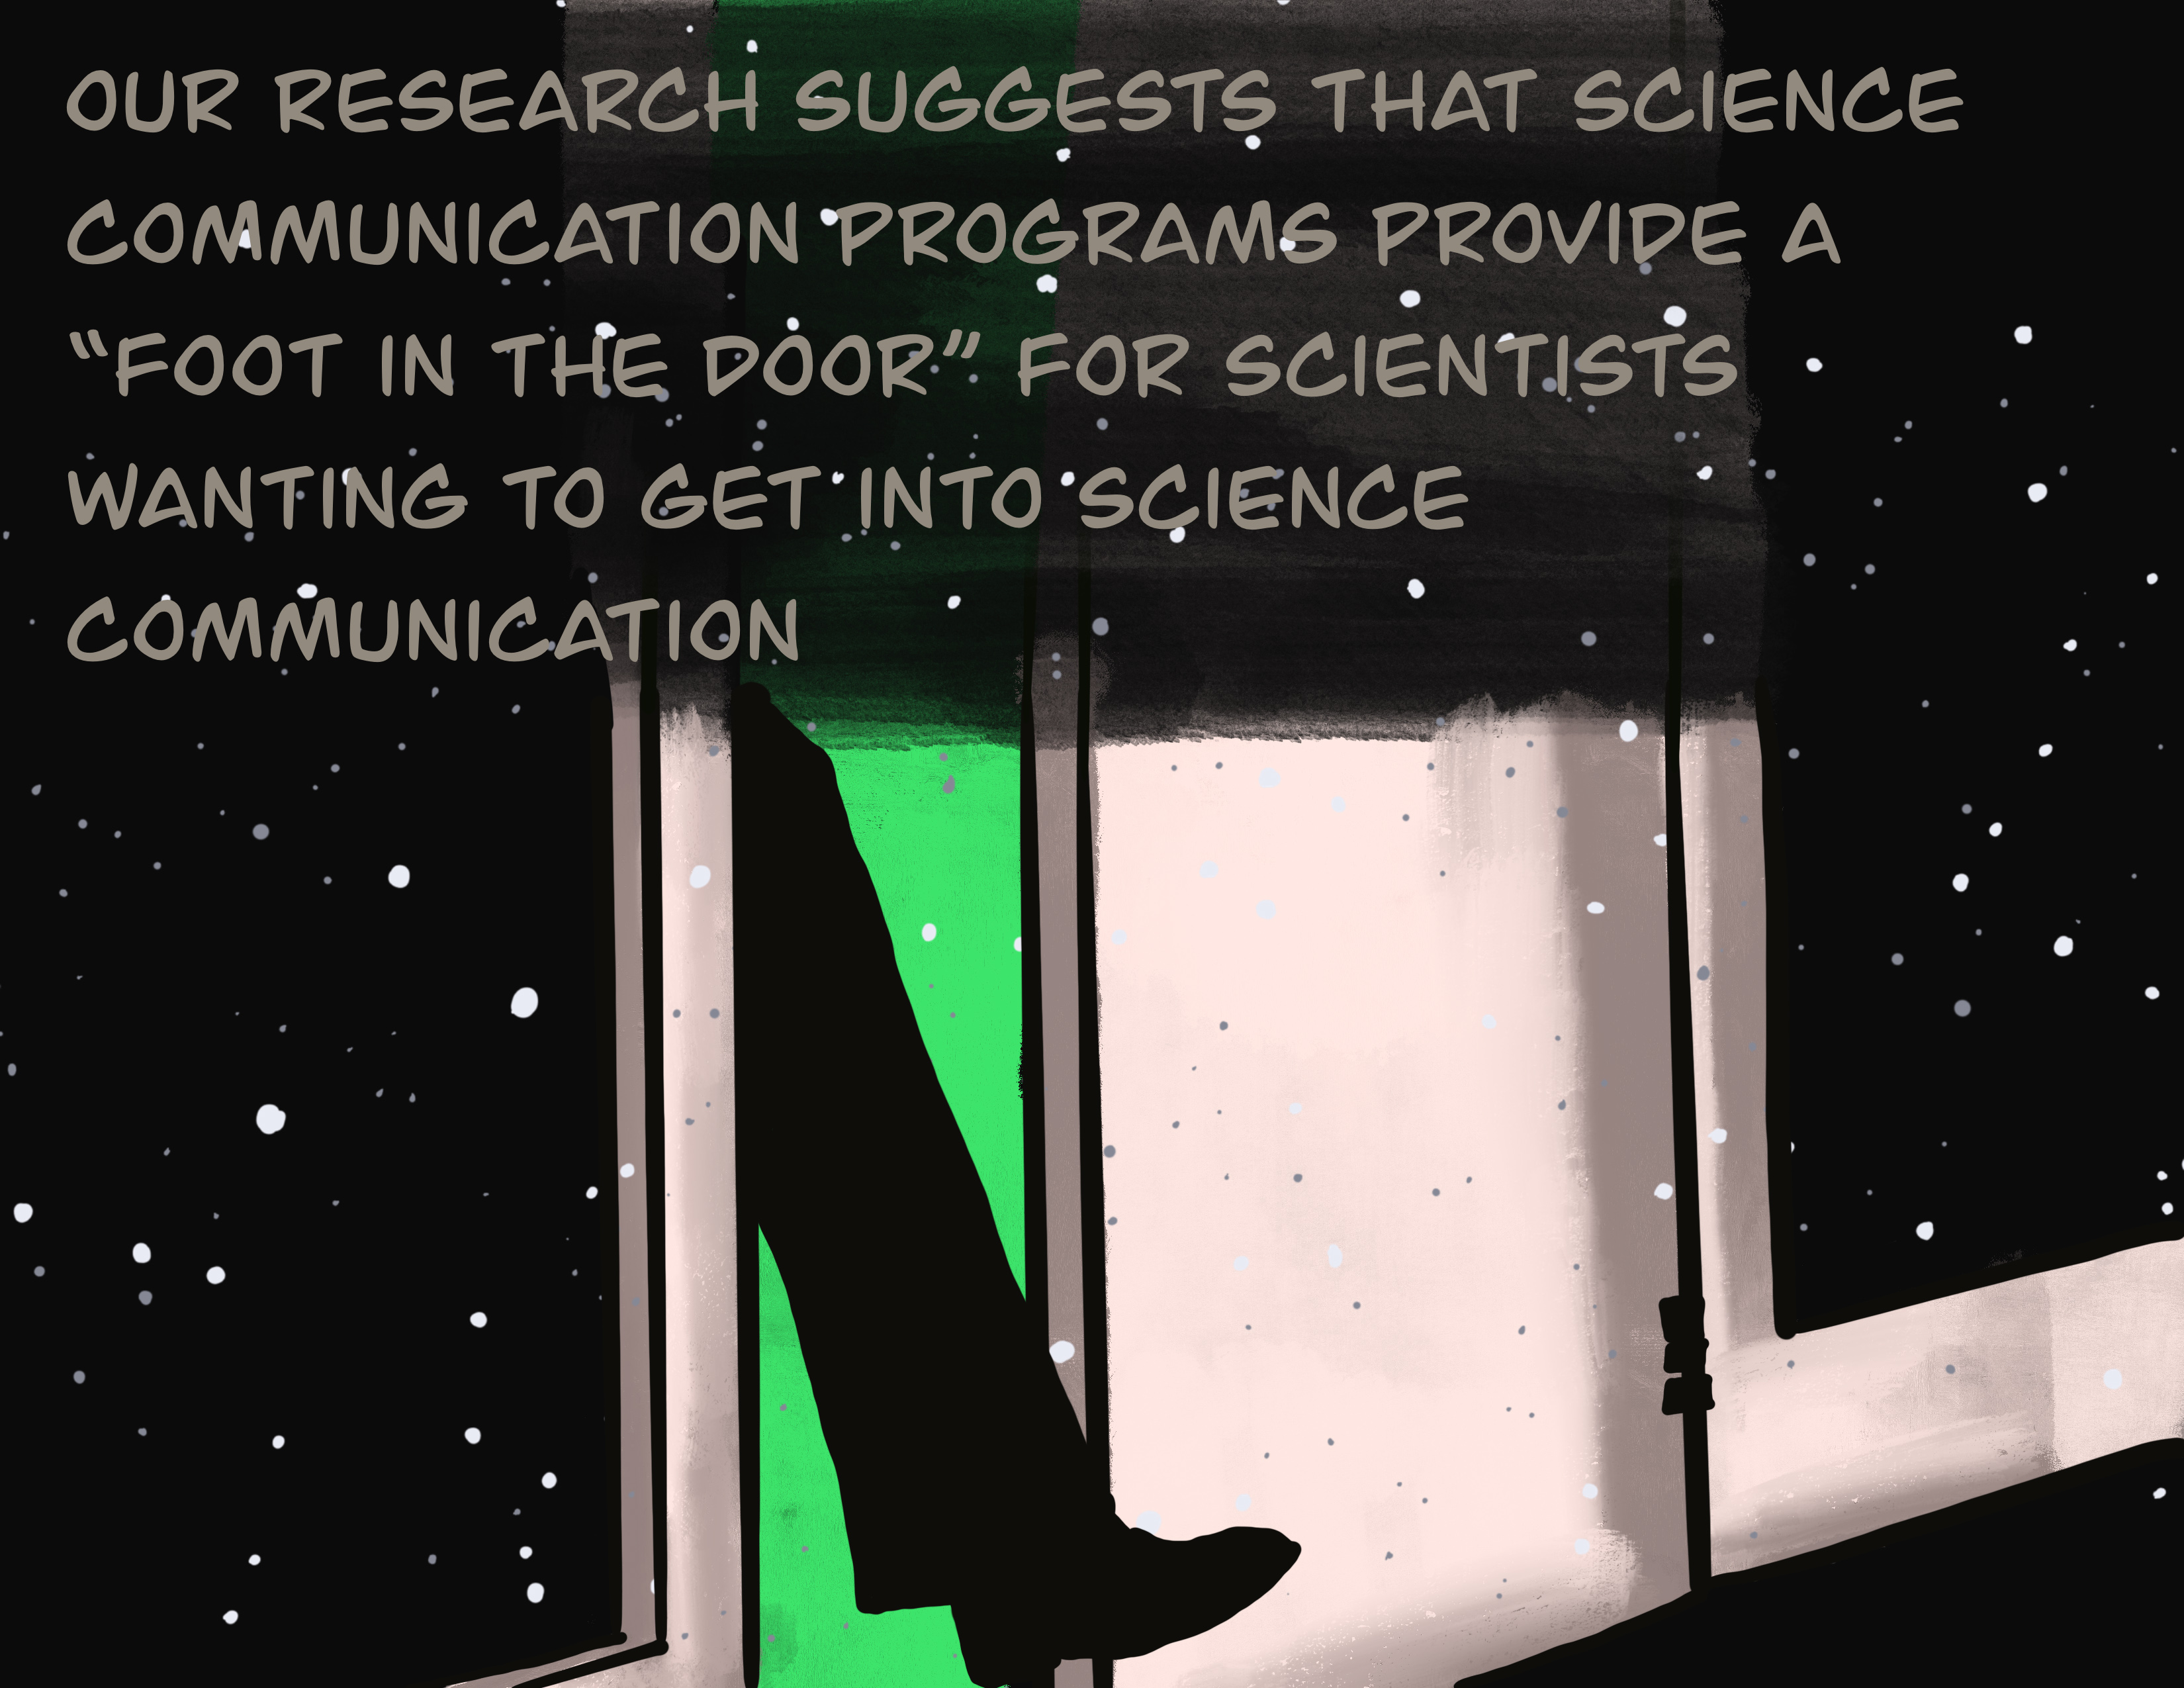 Our research suggests that science communication programs provide a "foot in the door" for scientists wanting to get into science communication